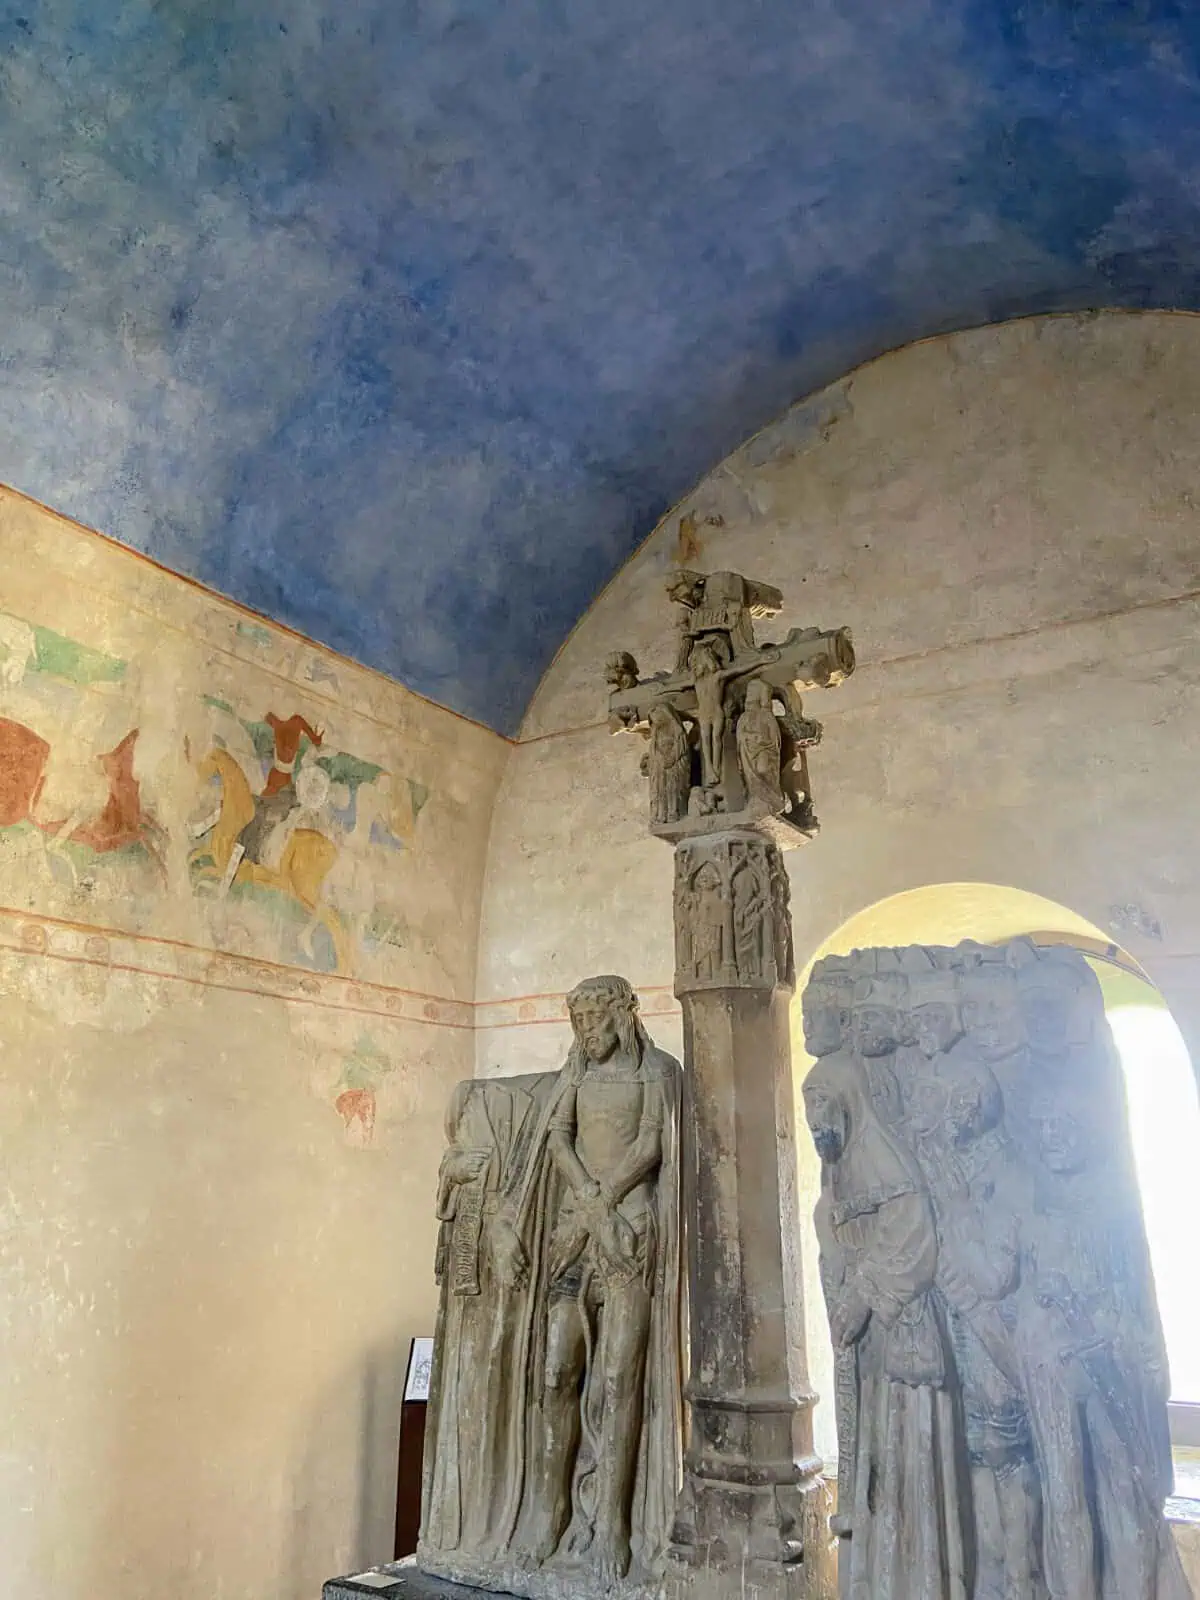 Interior of the Carcassonne Castle with statues and painted walls 